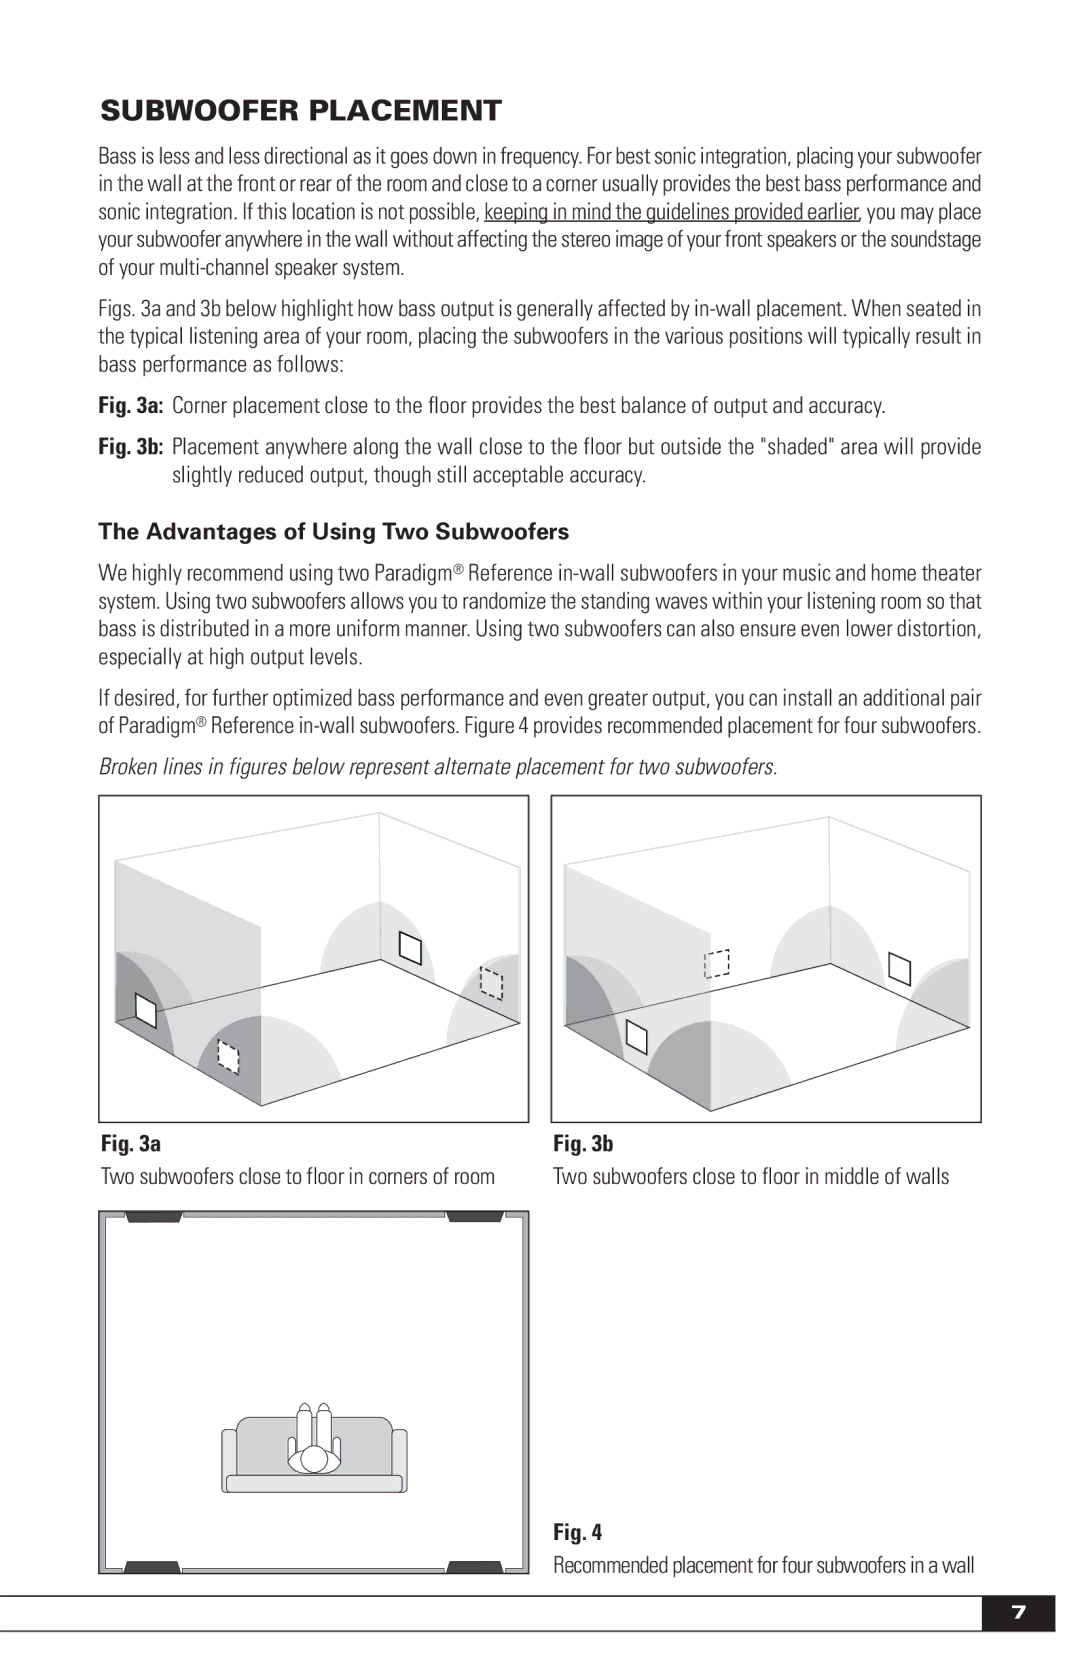 Paradigm IN-WALL SUBWOOFERS, OM-605 owner manual Subwoofer Placement, Advantages of Using Two Subwoofers 